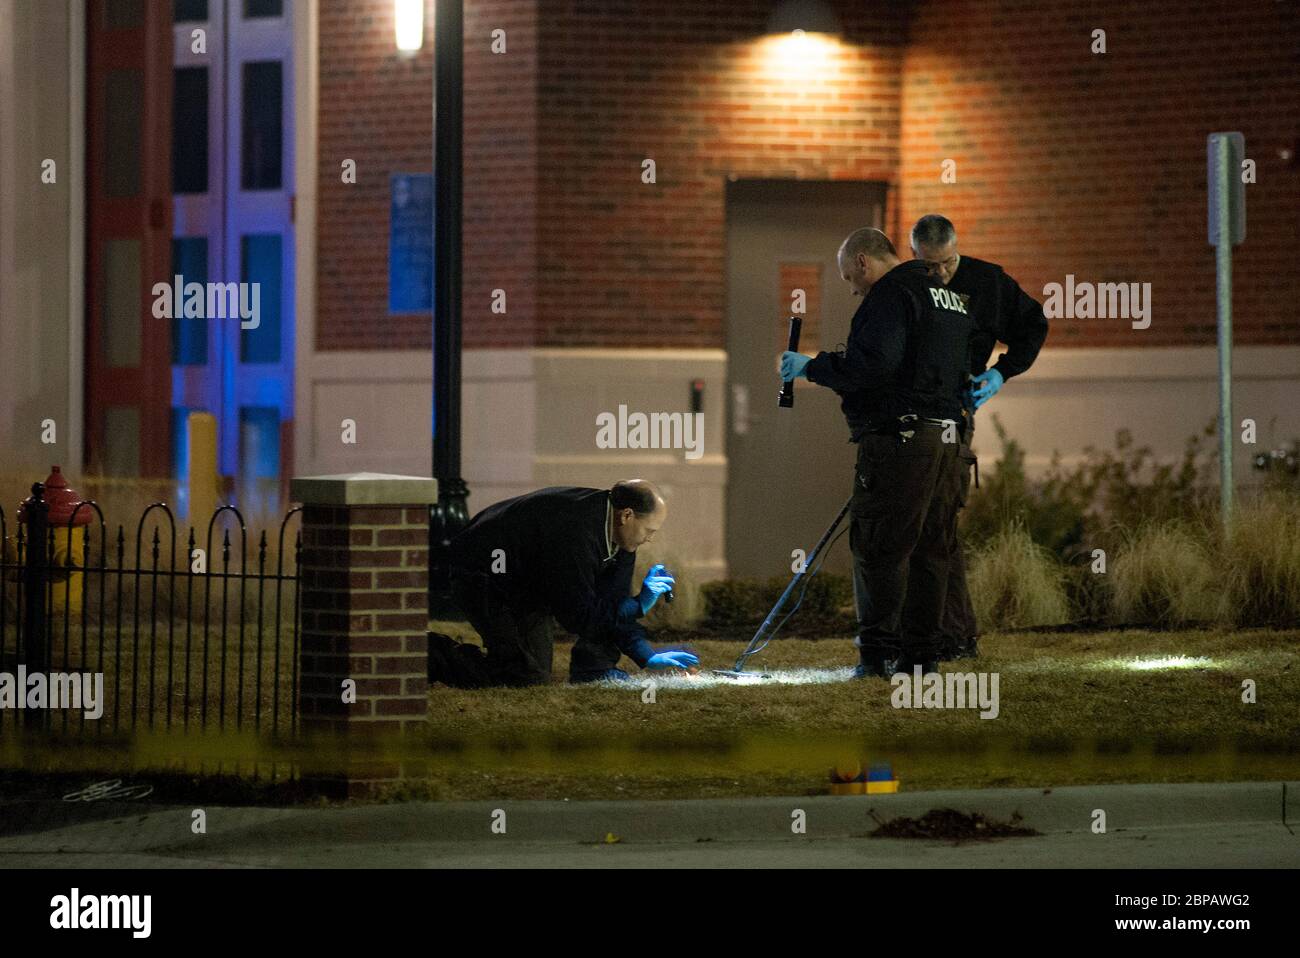 Police officers shot during protest in Ferguon, Missouri USA Stock Photo